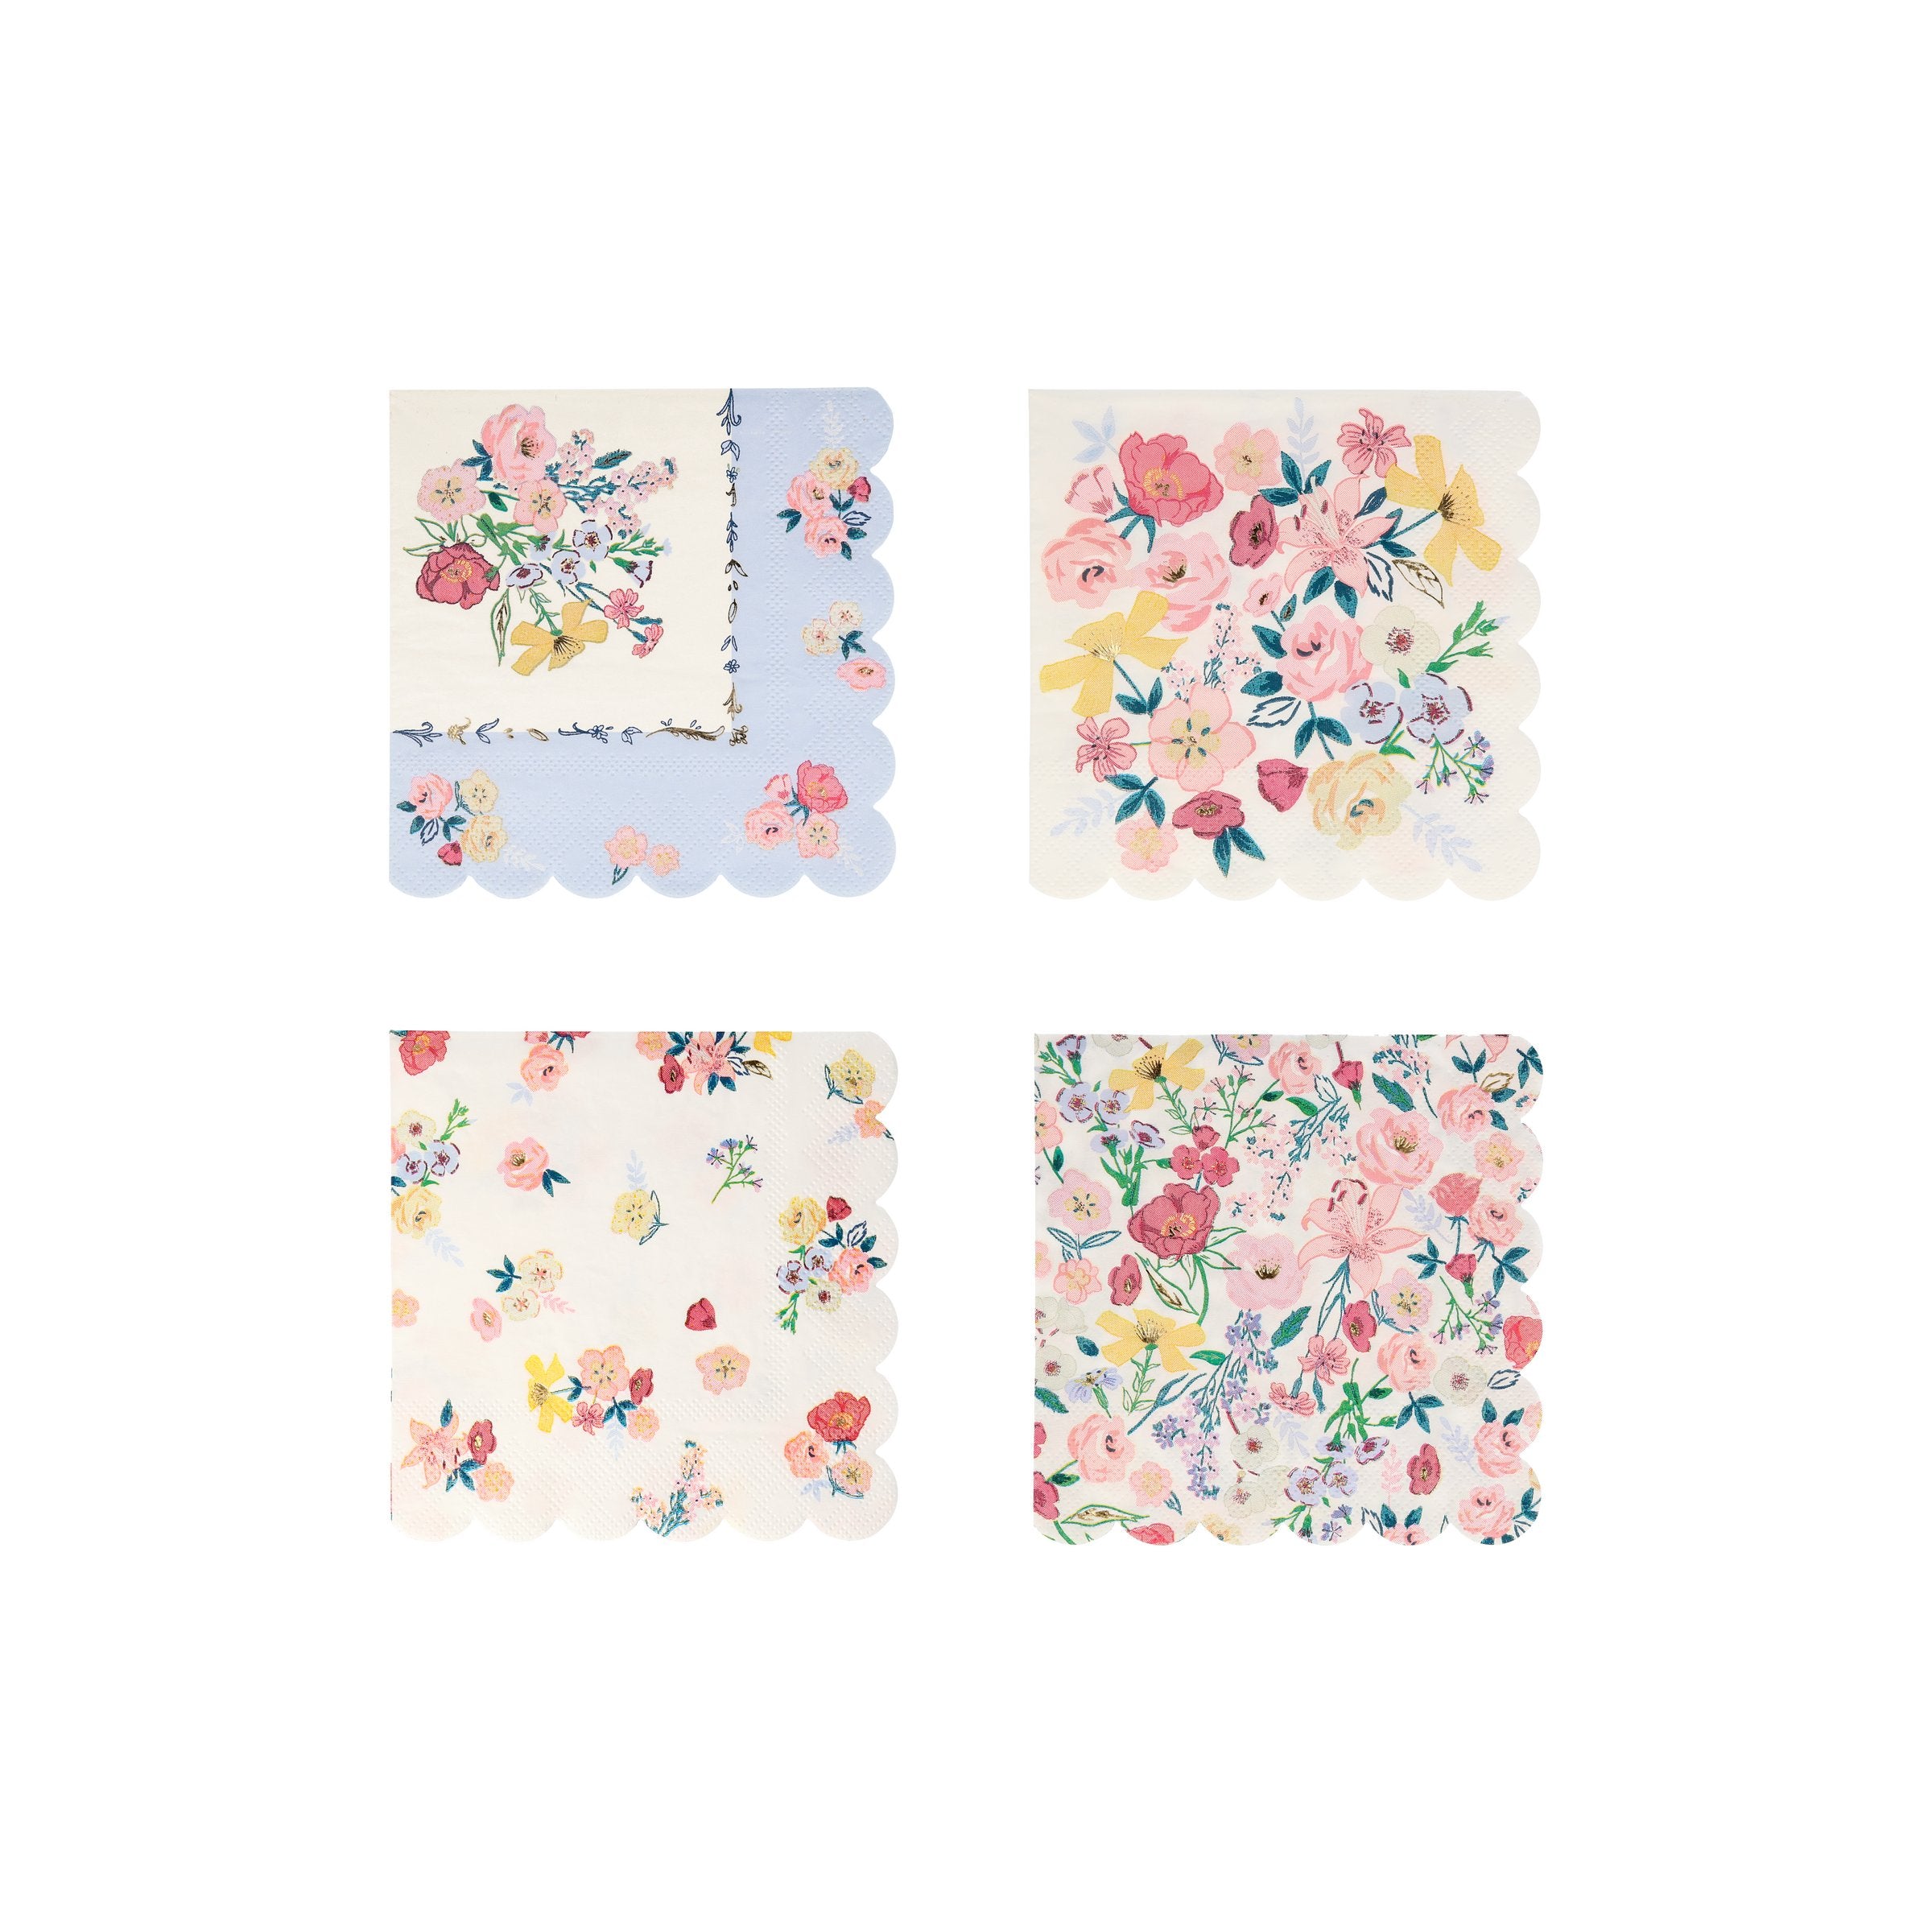 Our party napkins, in a small size, with pretty flower designs, are ideal for cocktail parties, garden parties or picnics.